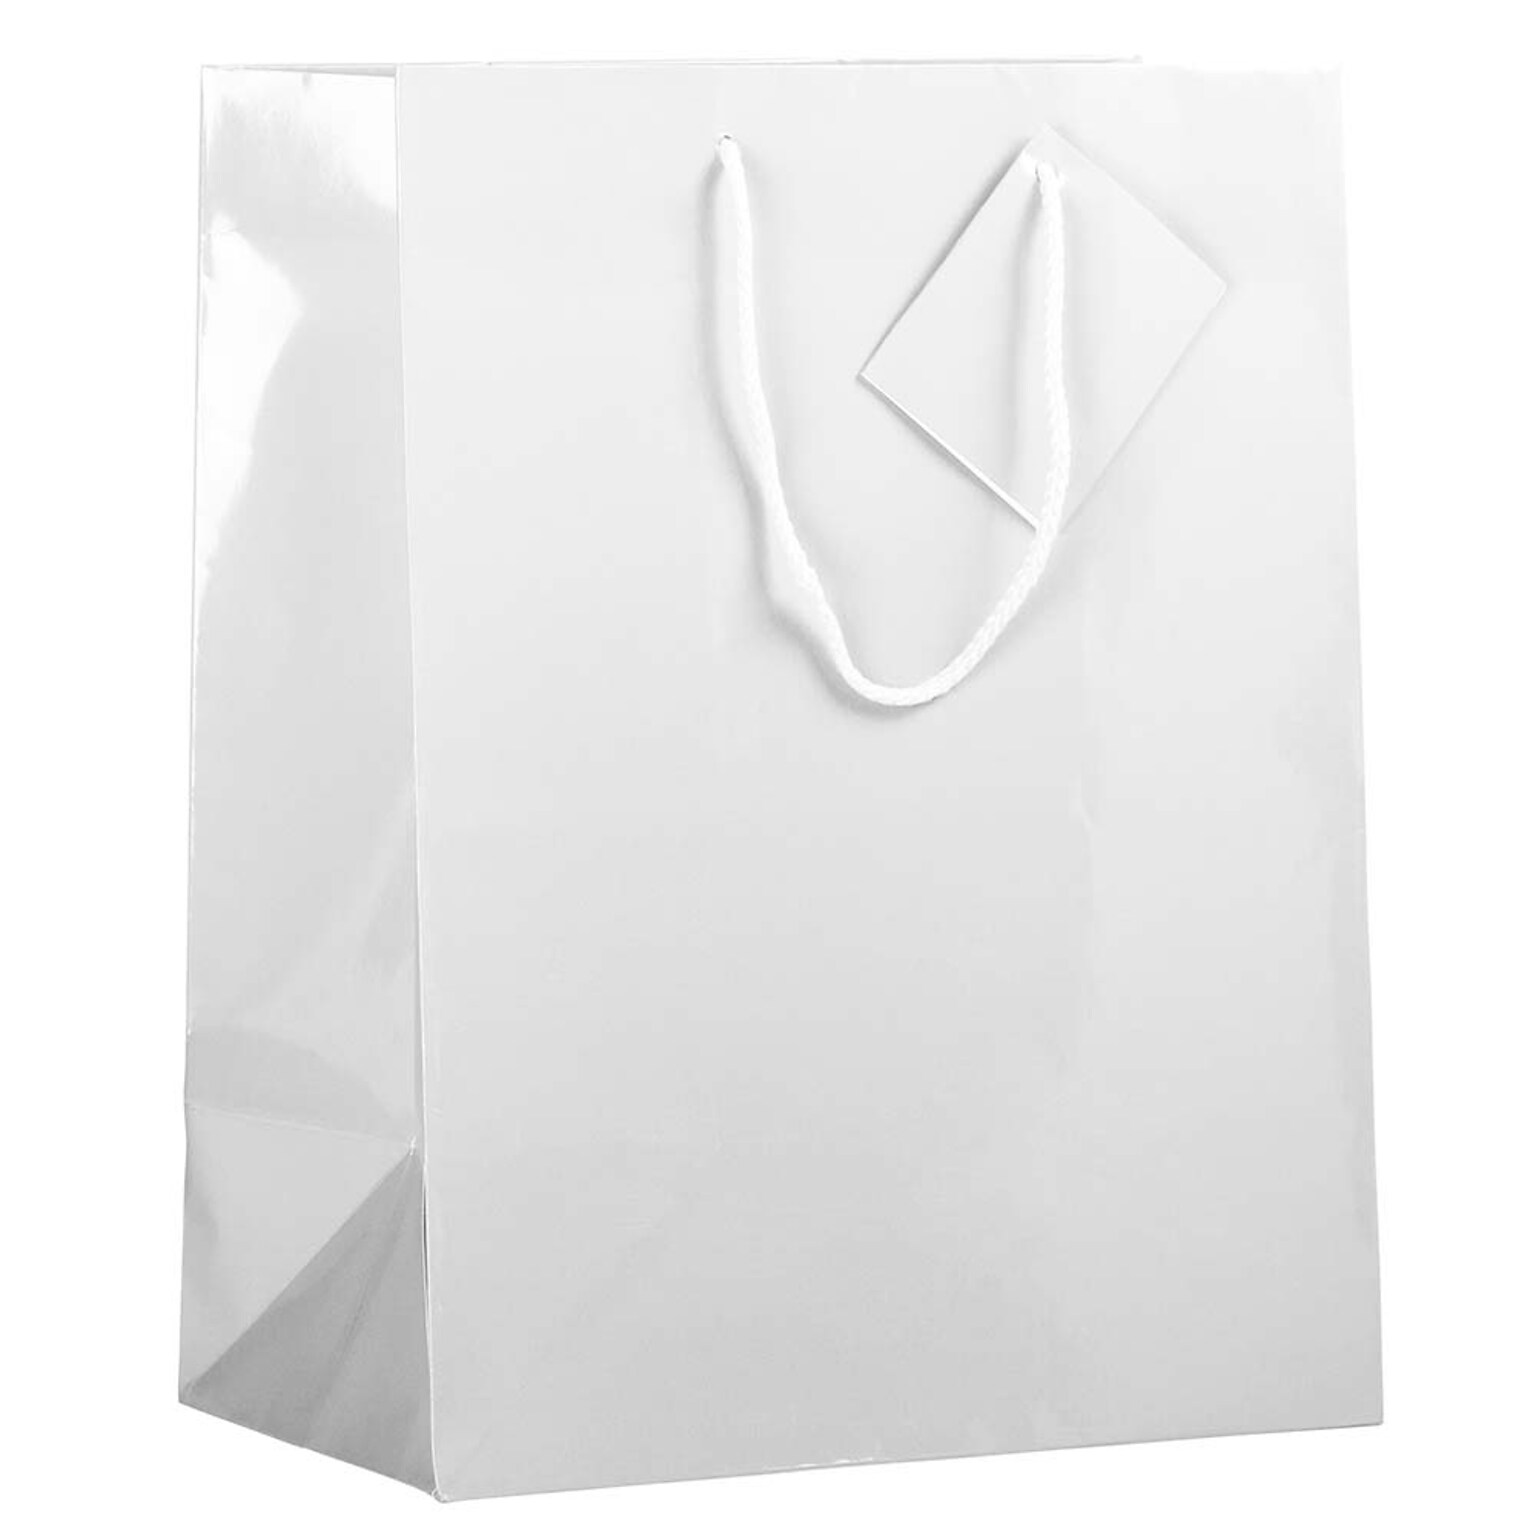 JAM Paper Glossy Gift Bag, Large, White, 6 Bags/Pack (673GLwha)